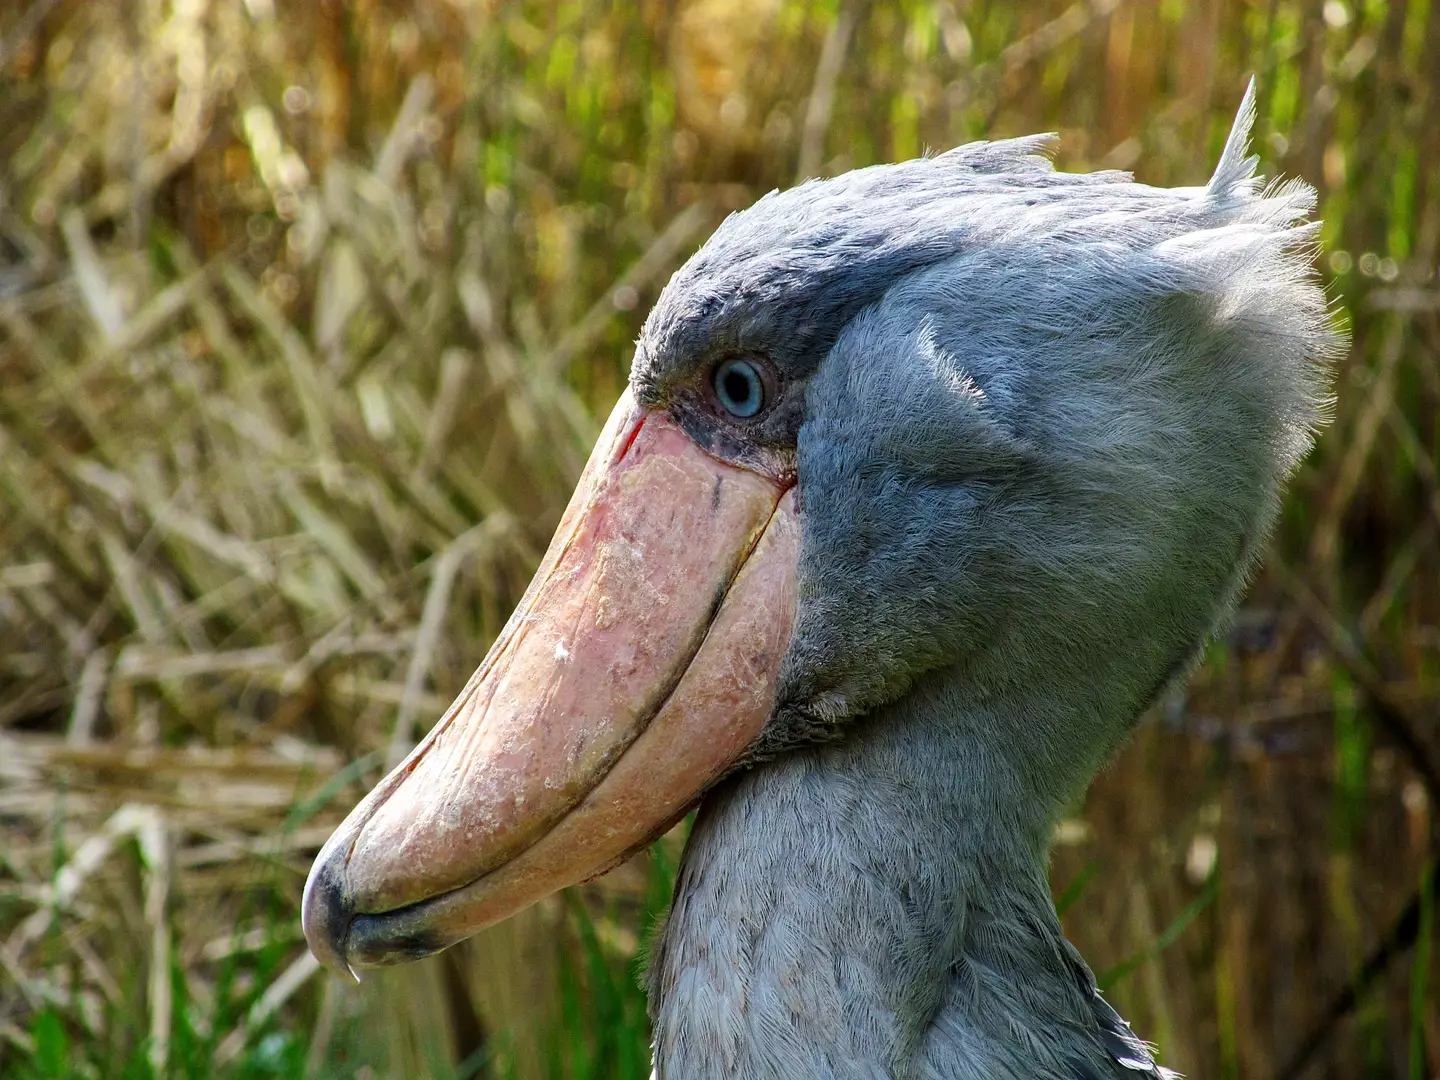 Shoebills are known for their ability to stand still.